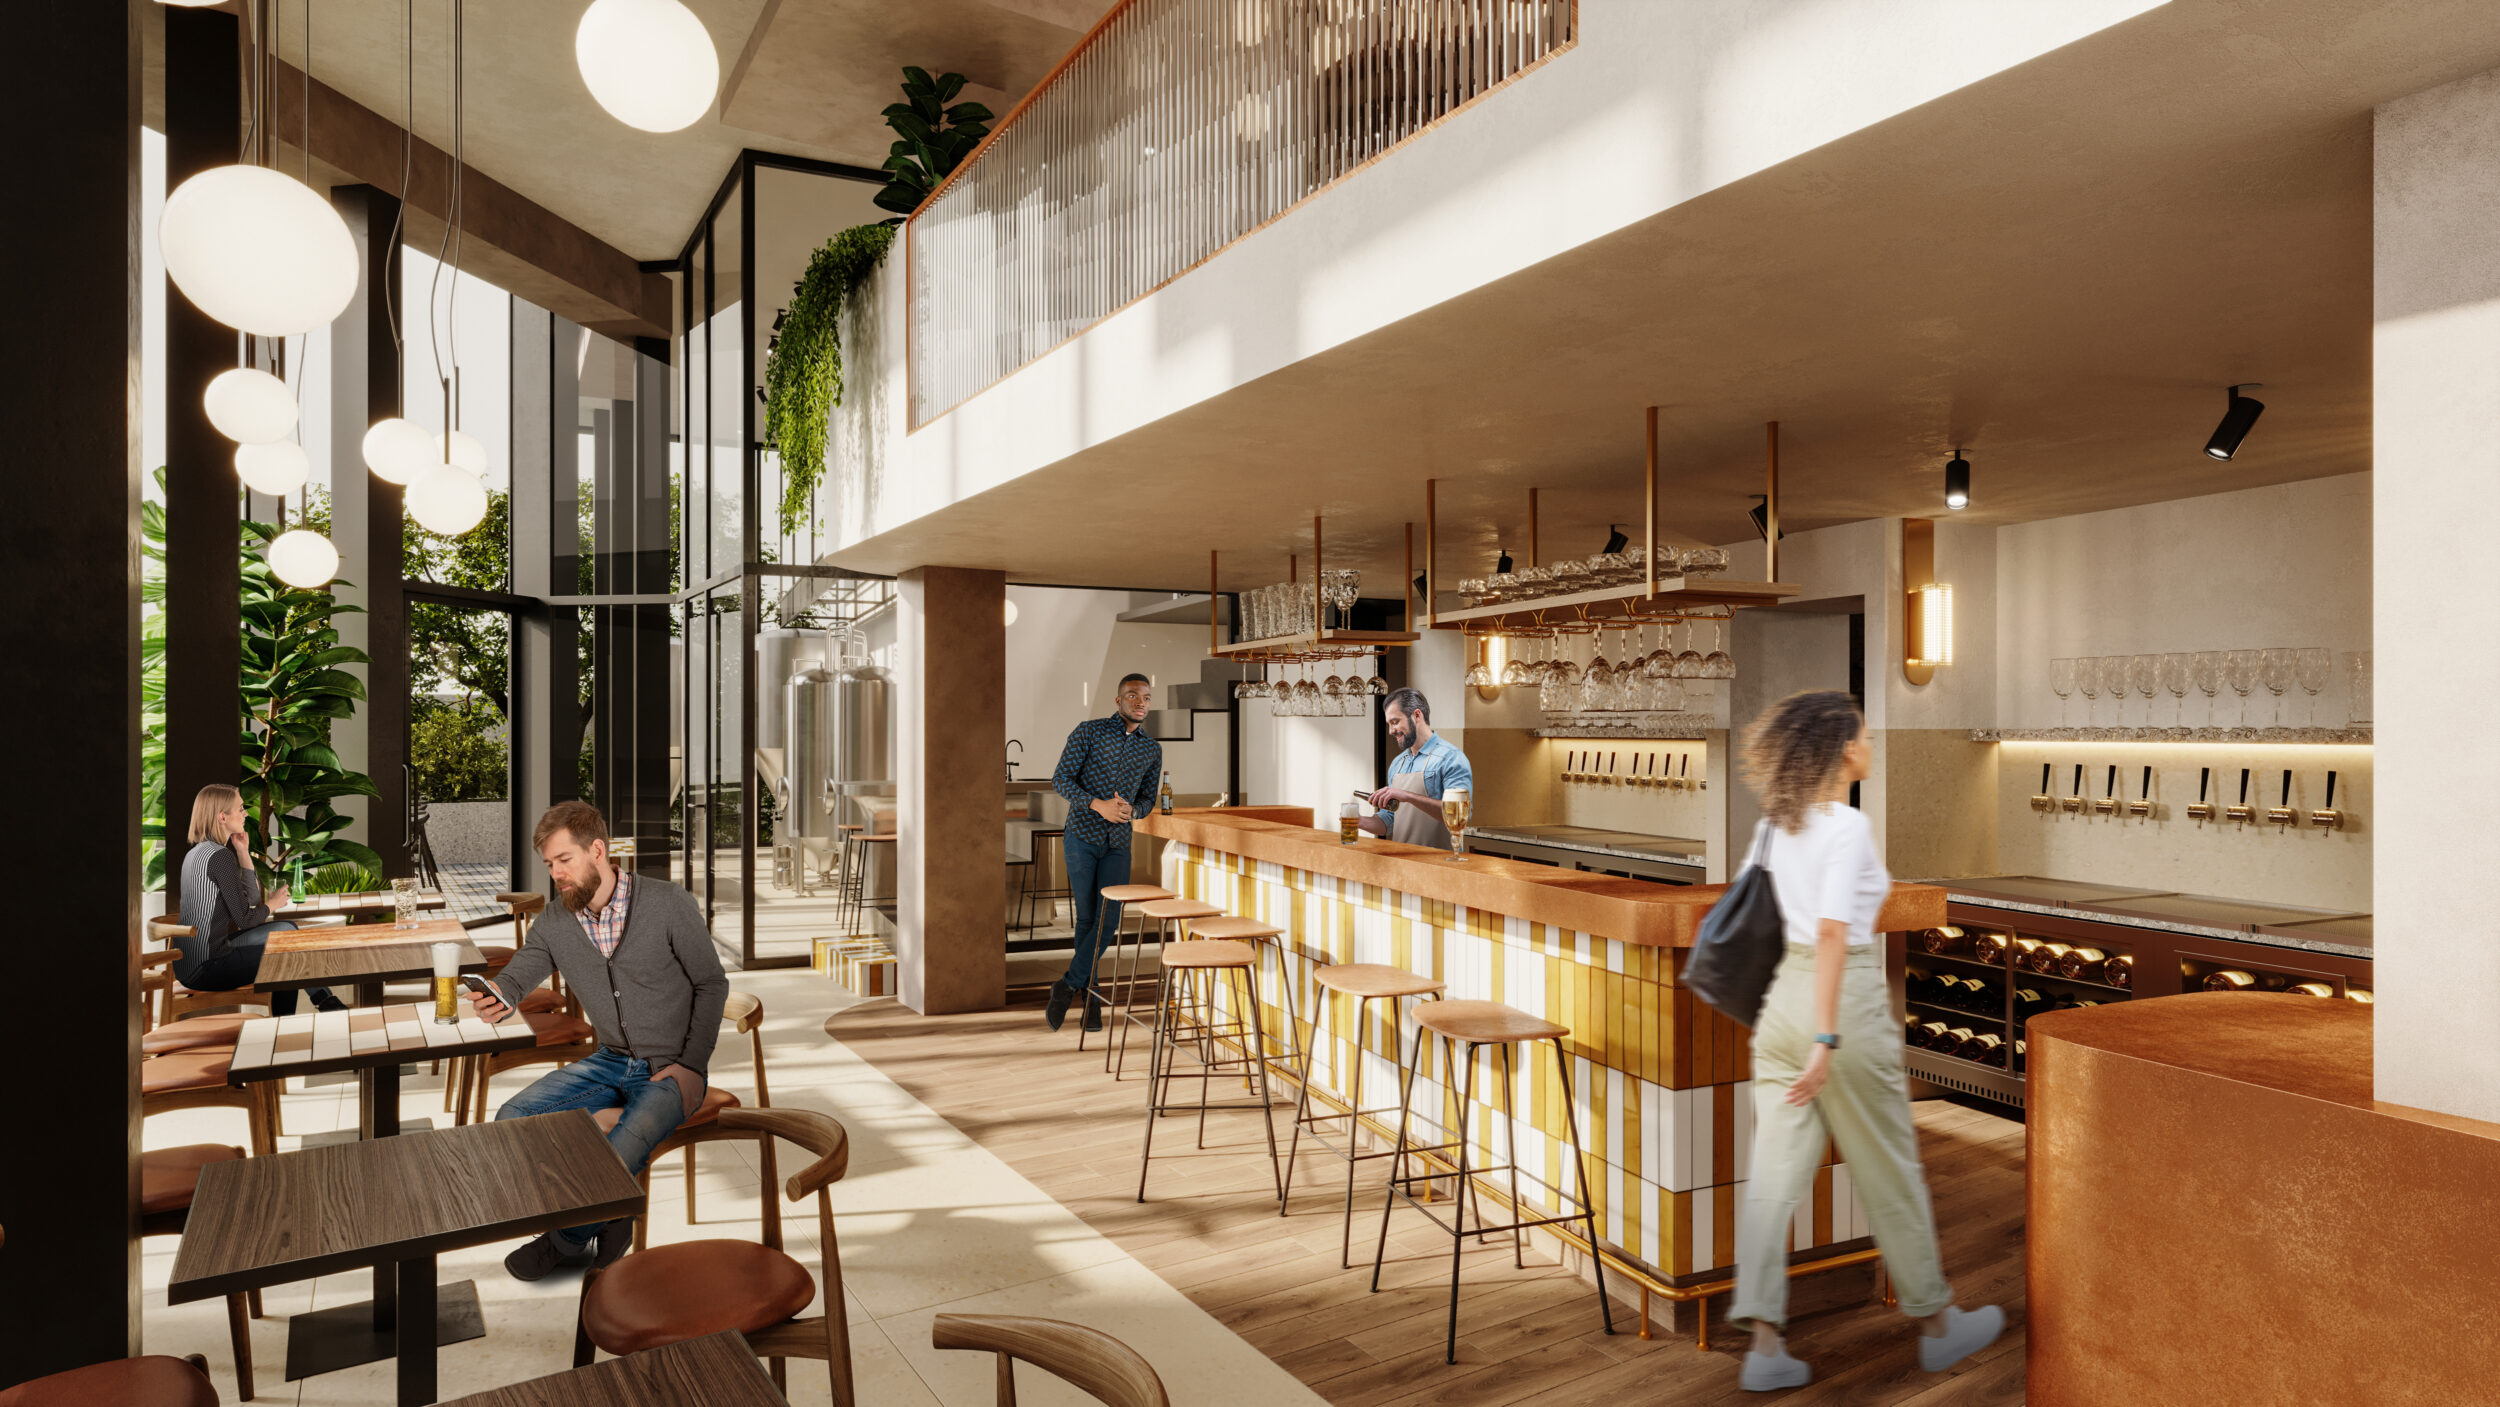 3D architectural rendering of a bar